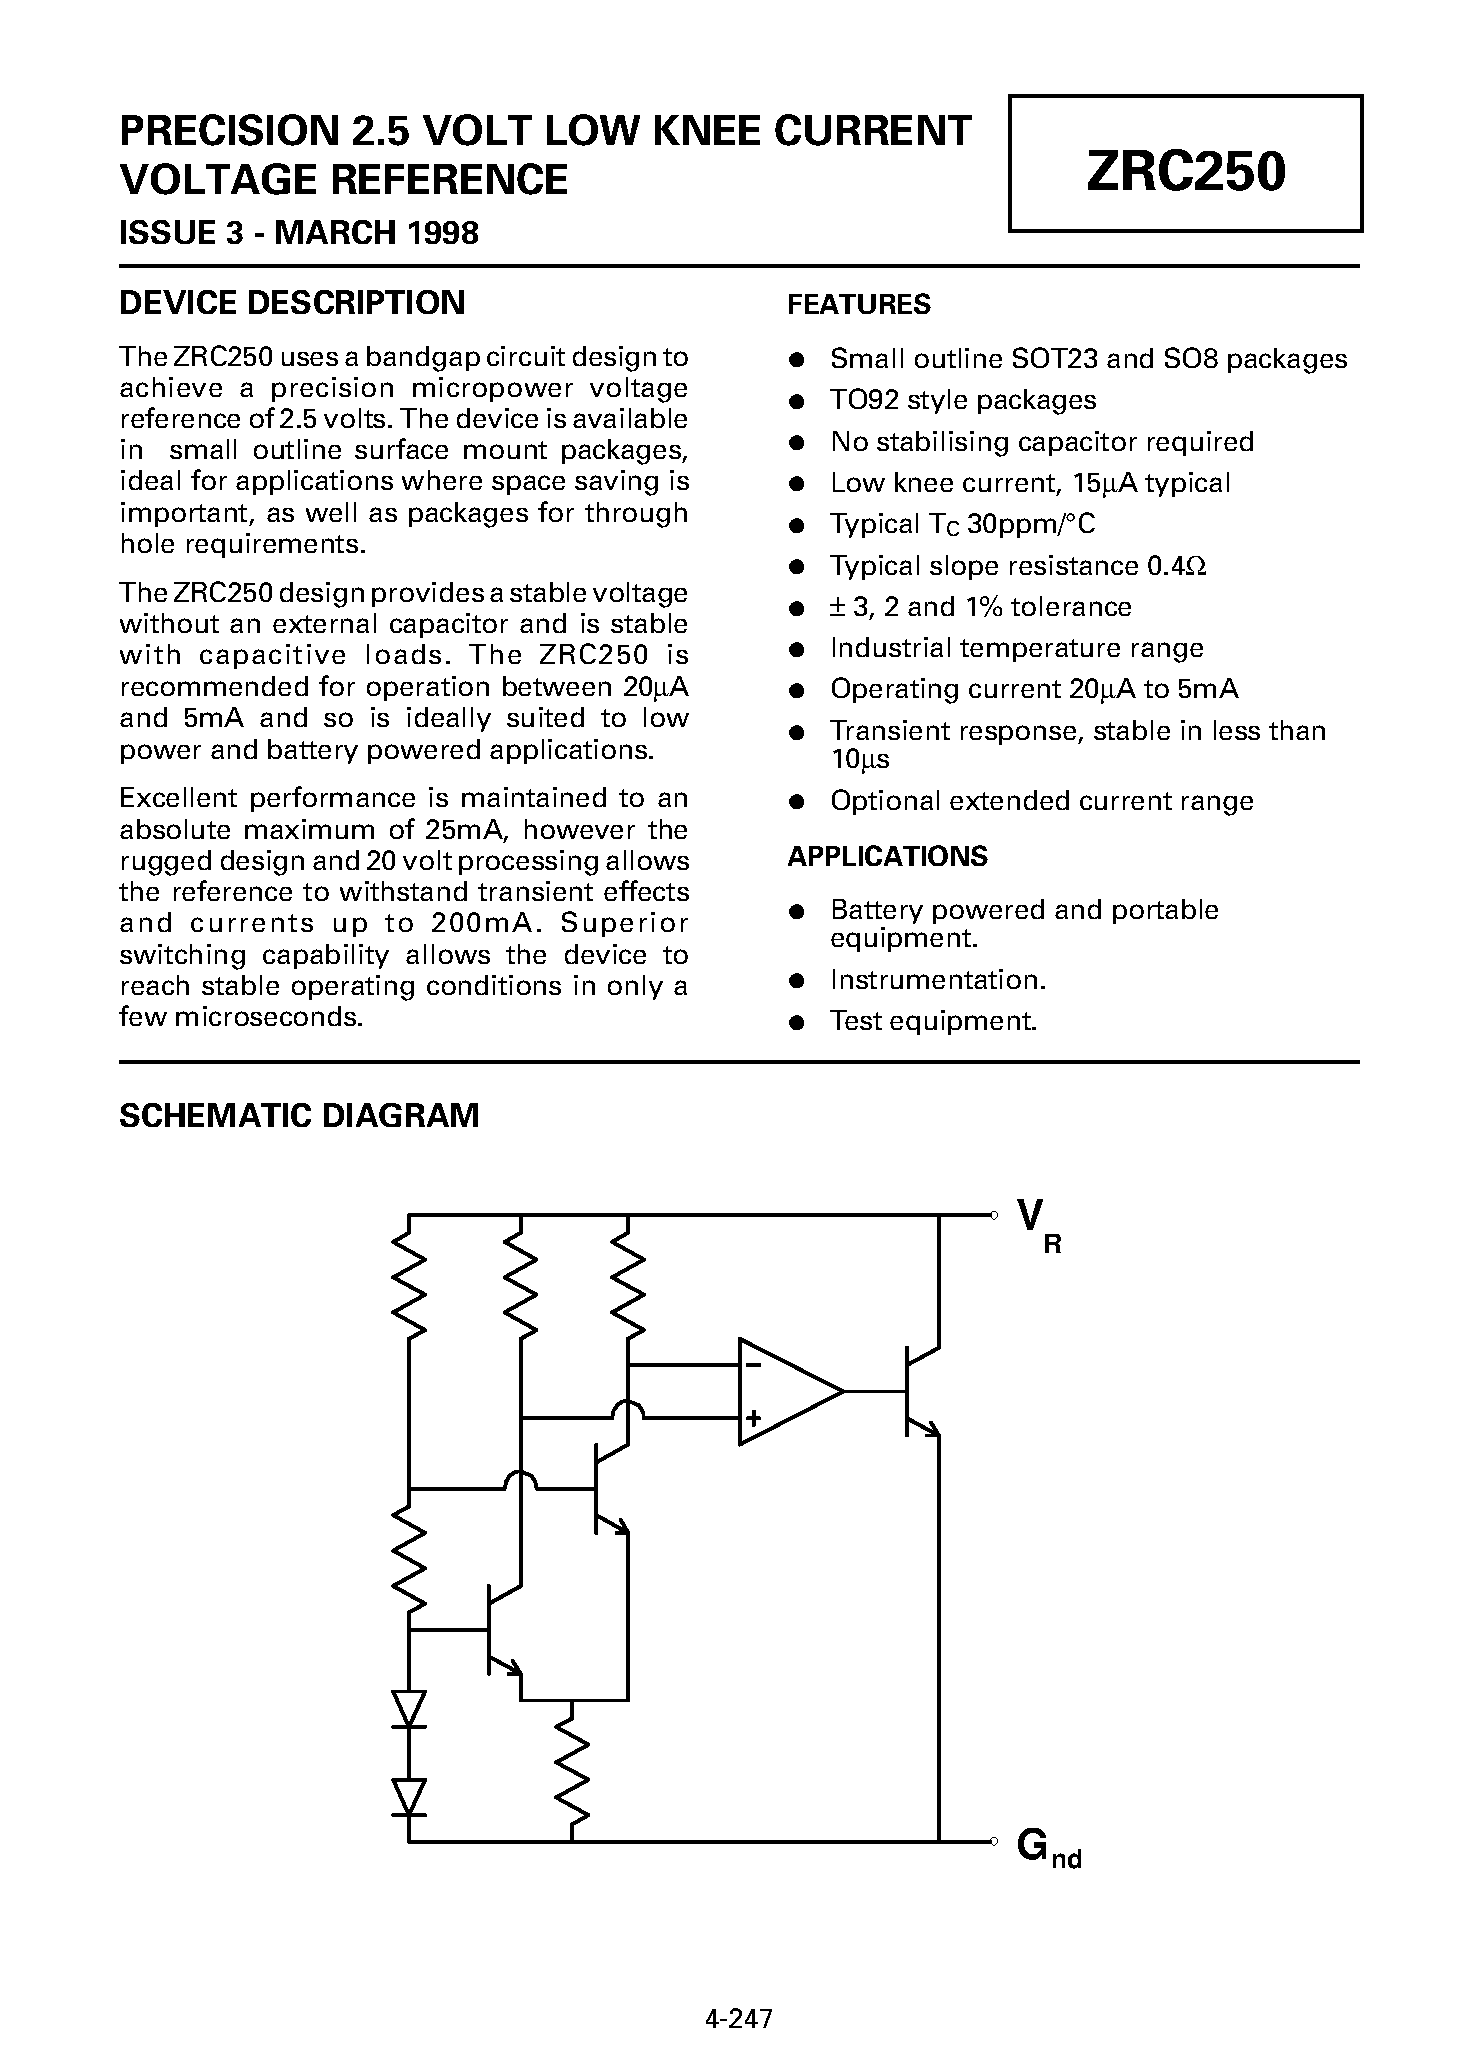 Datasheet ZRC250N801 - PRECISION 2.5 VOLT LOW KNEE CURRENT VOLTAGE REFERENCE page 1